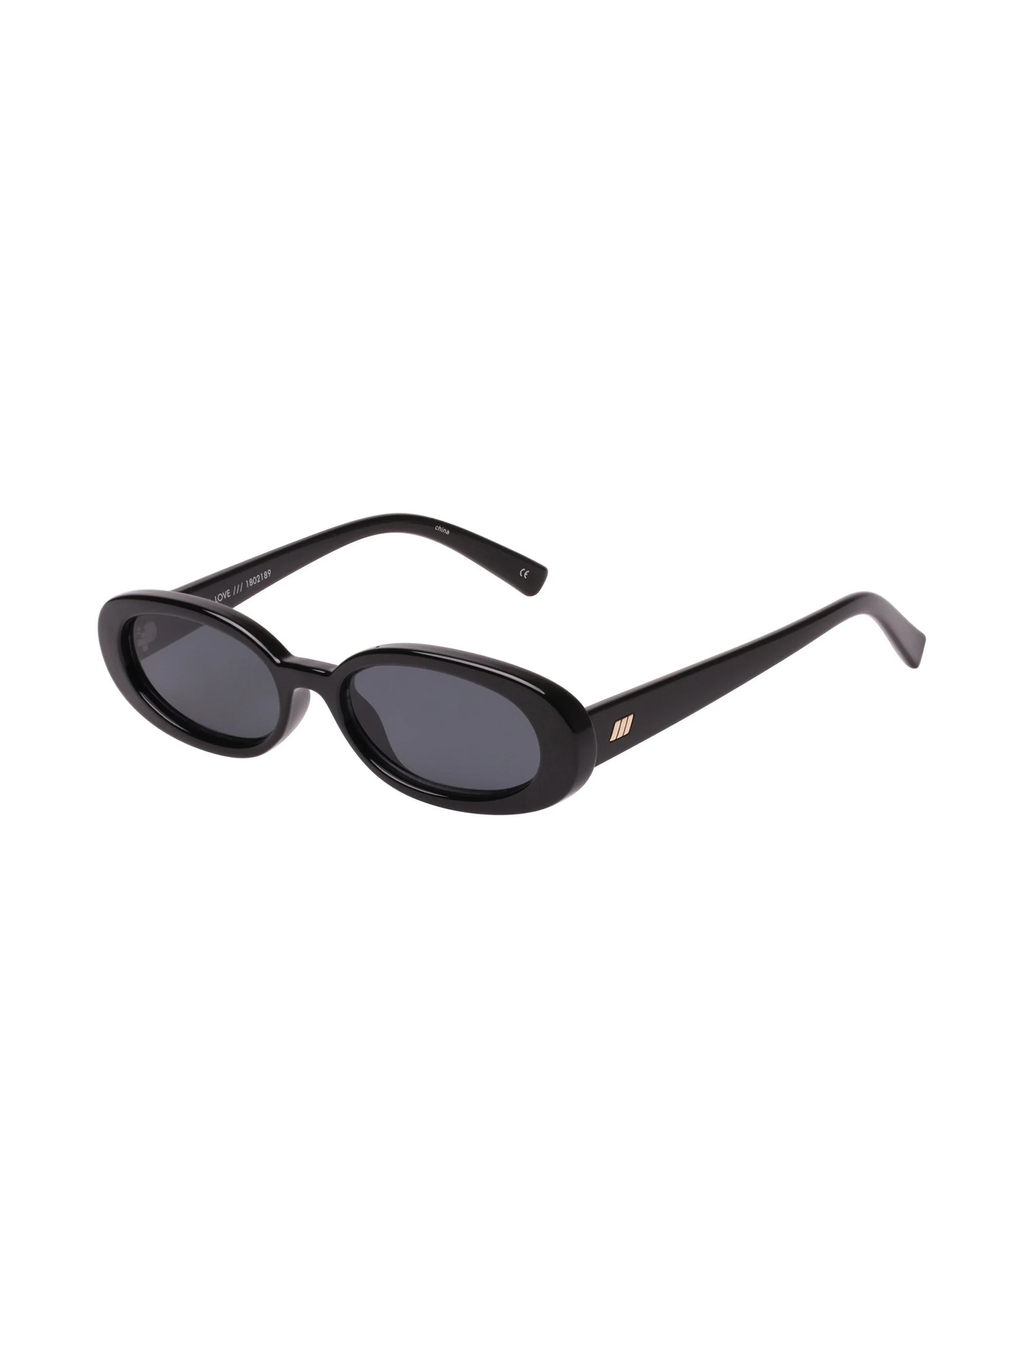 Outta Love Sunnies in Black - Stitch And Feather